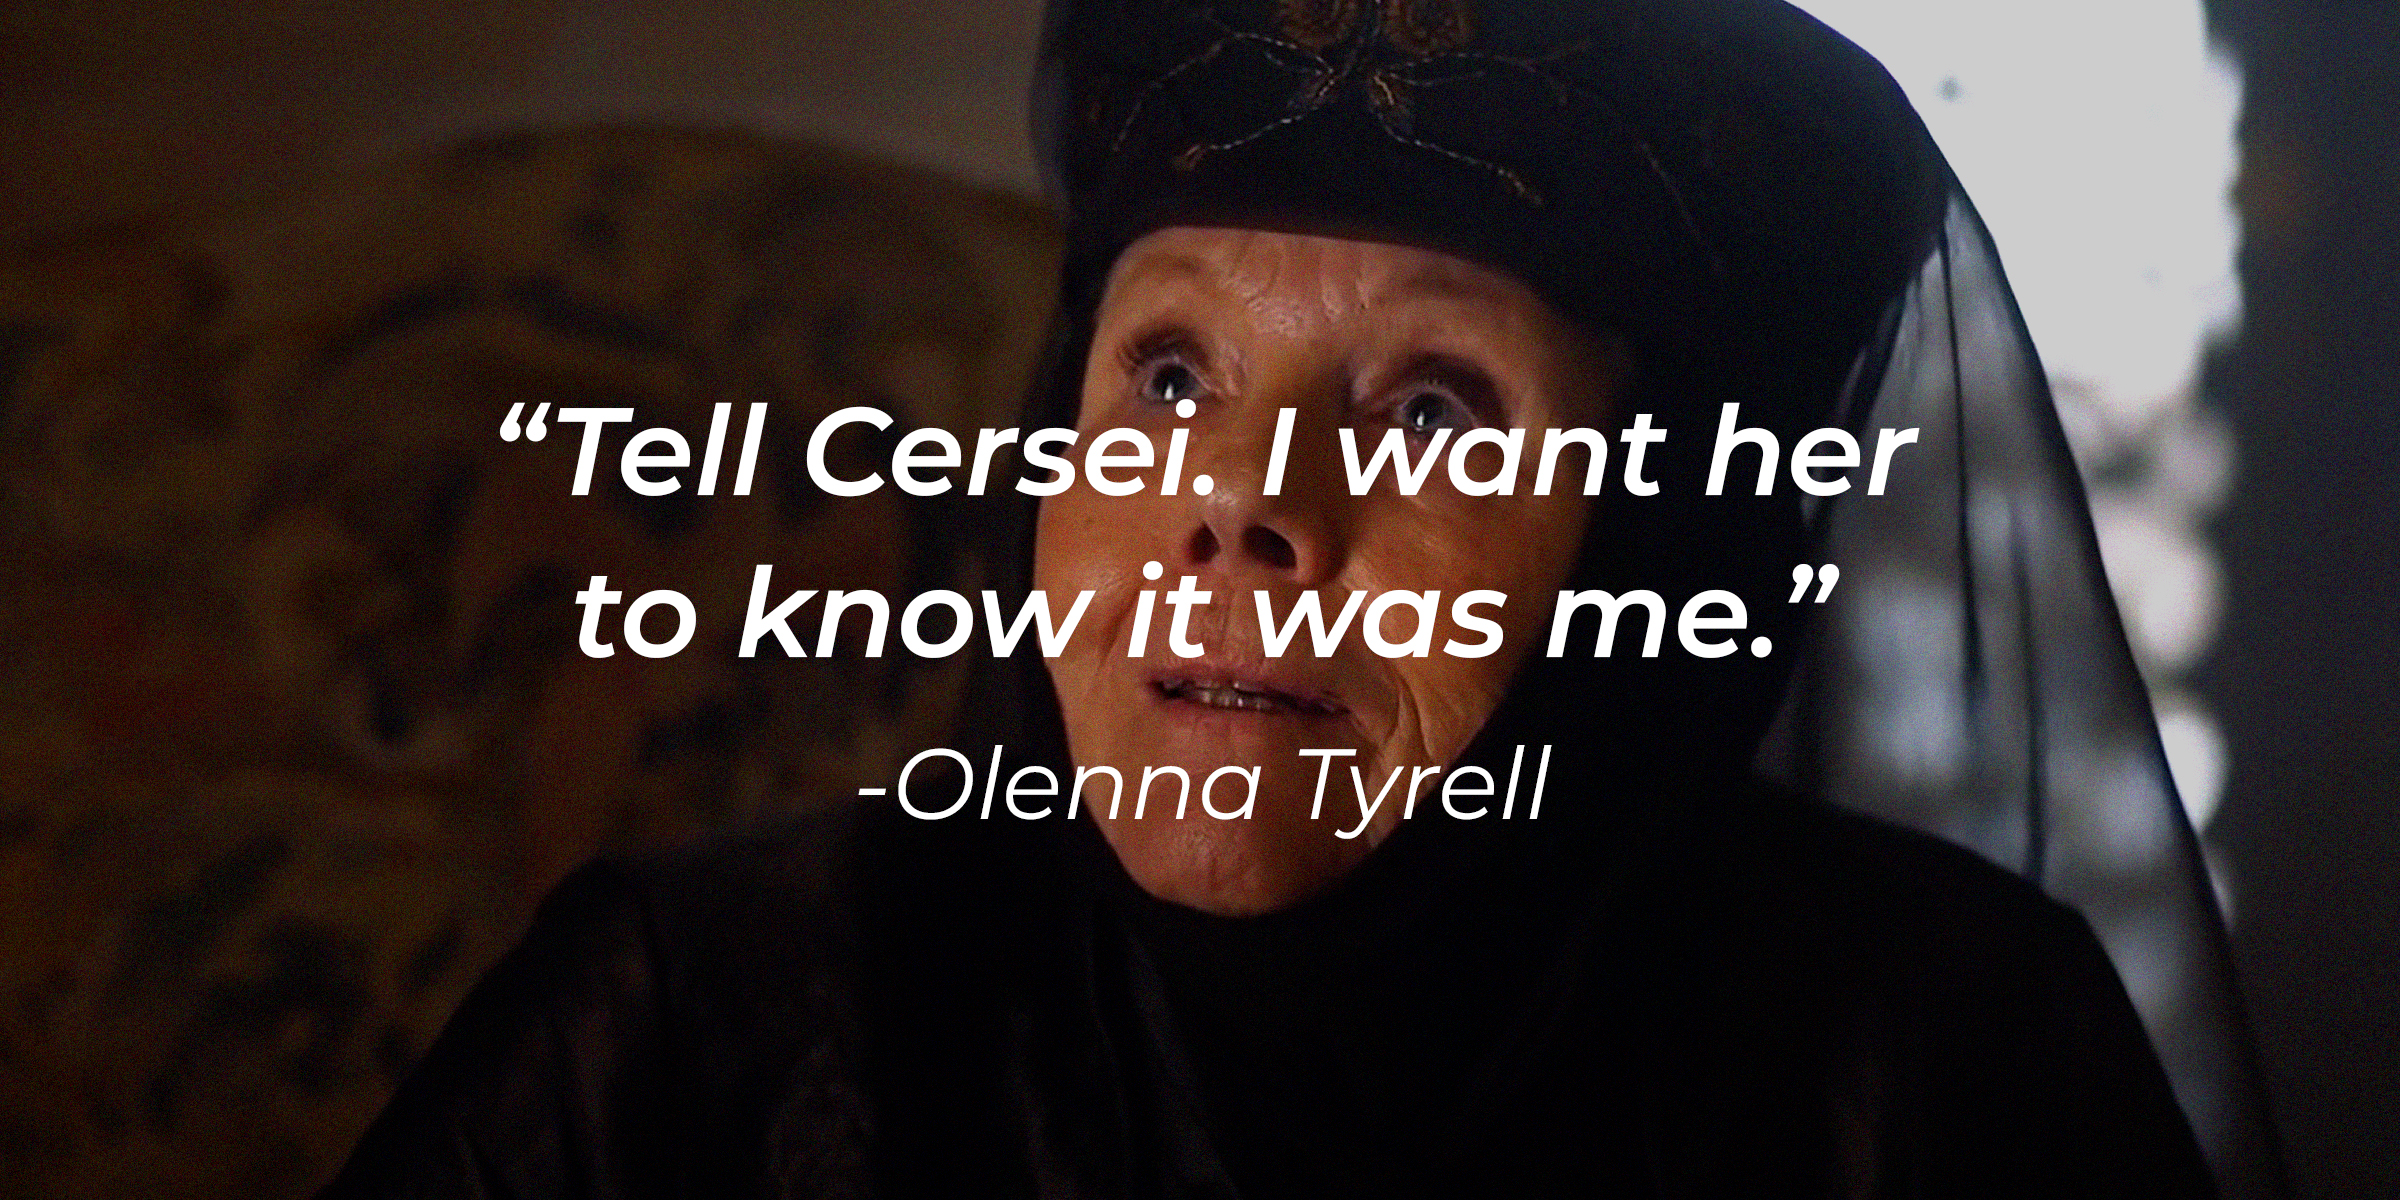 Olenna Tyrell, with her quote: “Tell Cersei. I want her to know it was me.” │ Source: facebook.com/GameOfThrones